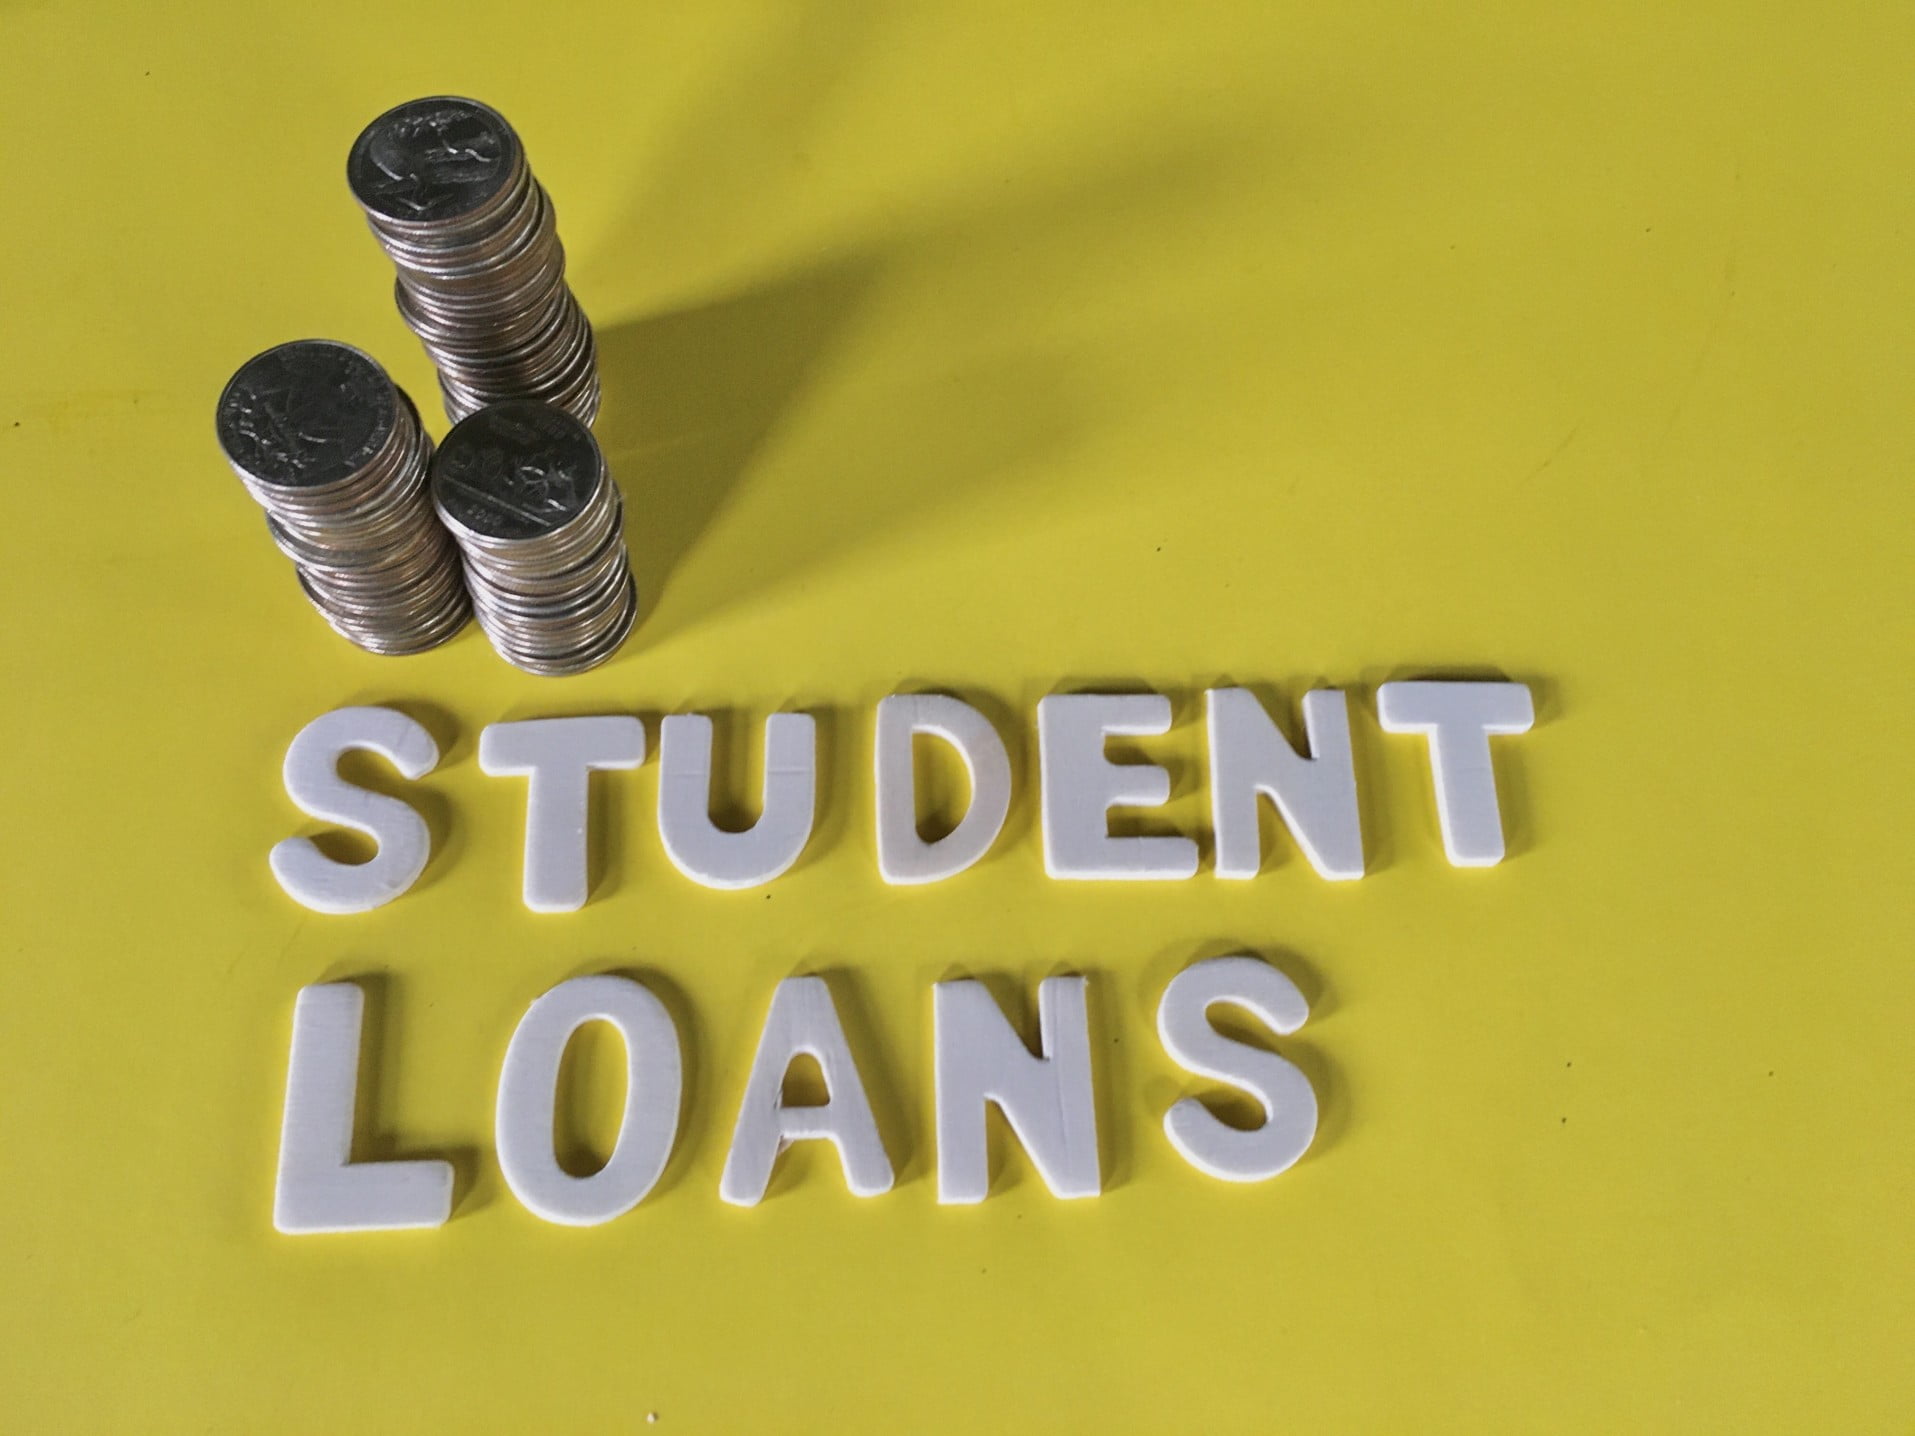 How Do Student Loans Work?